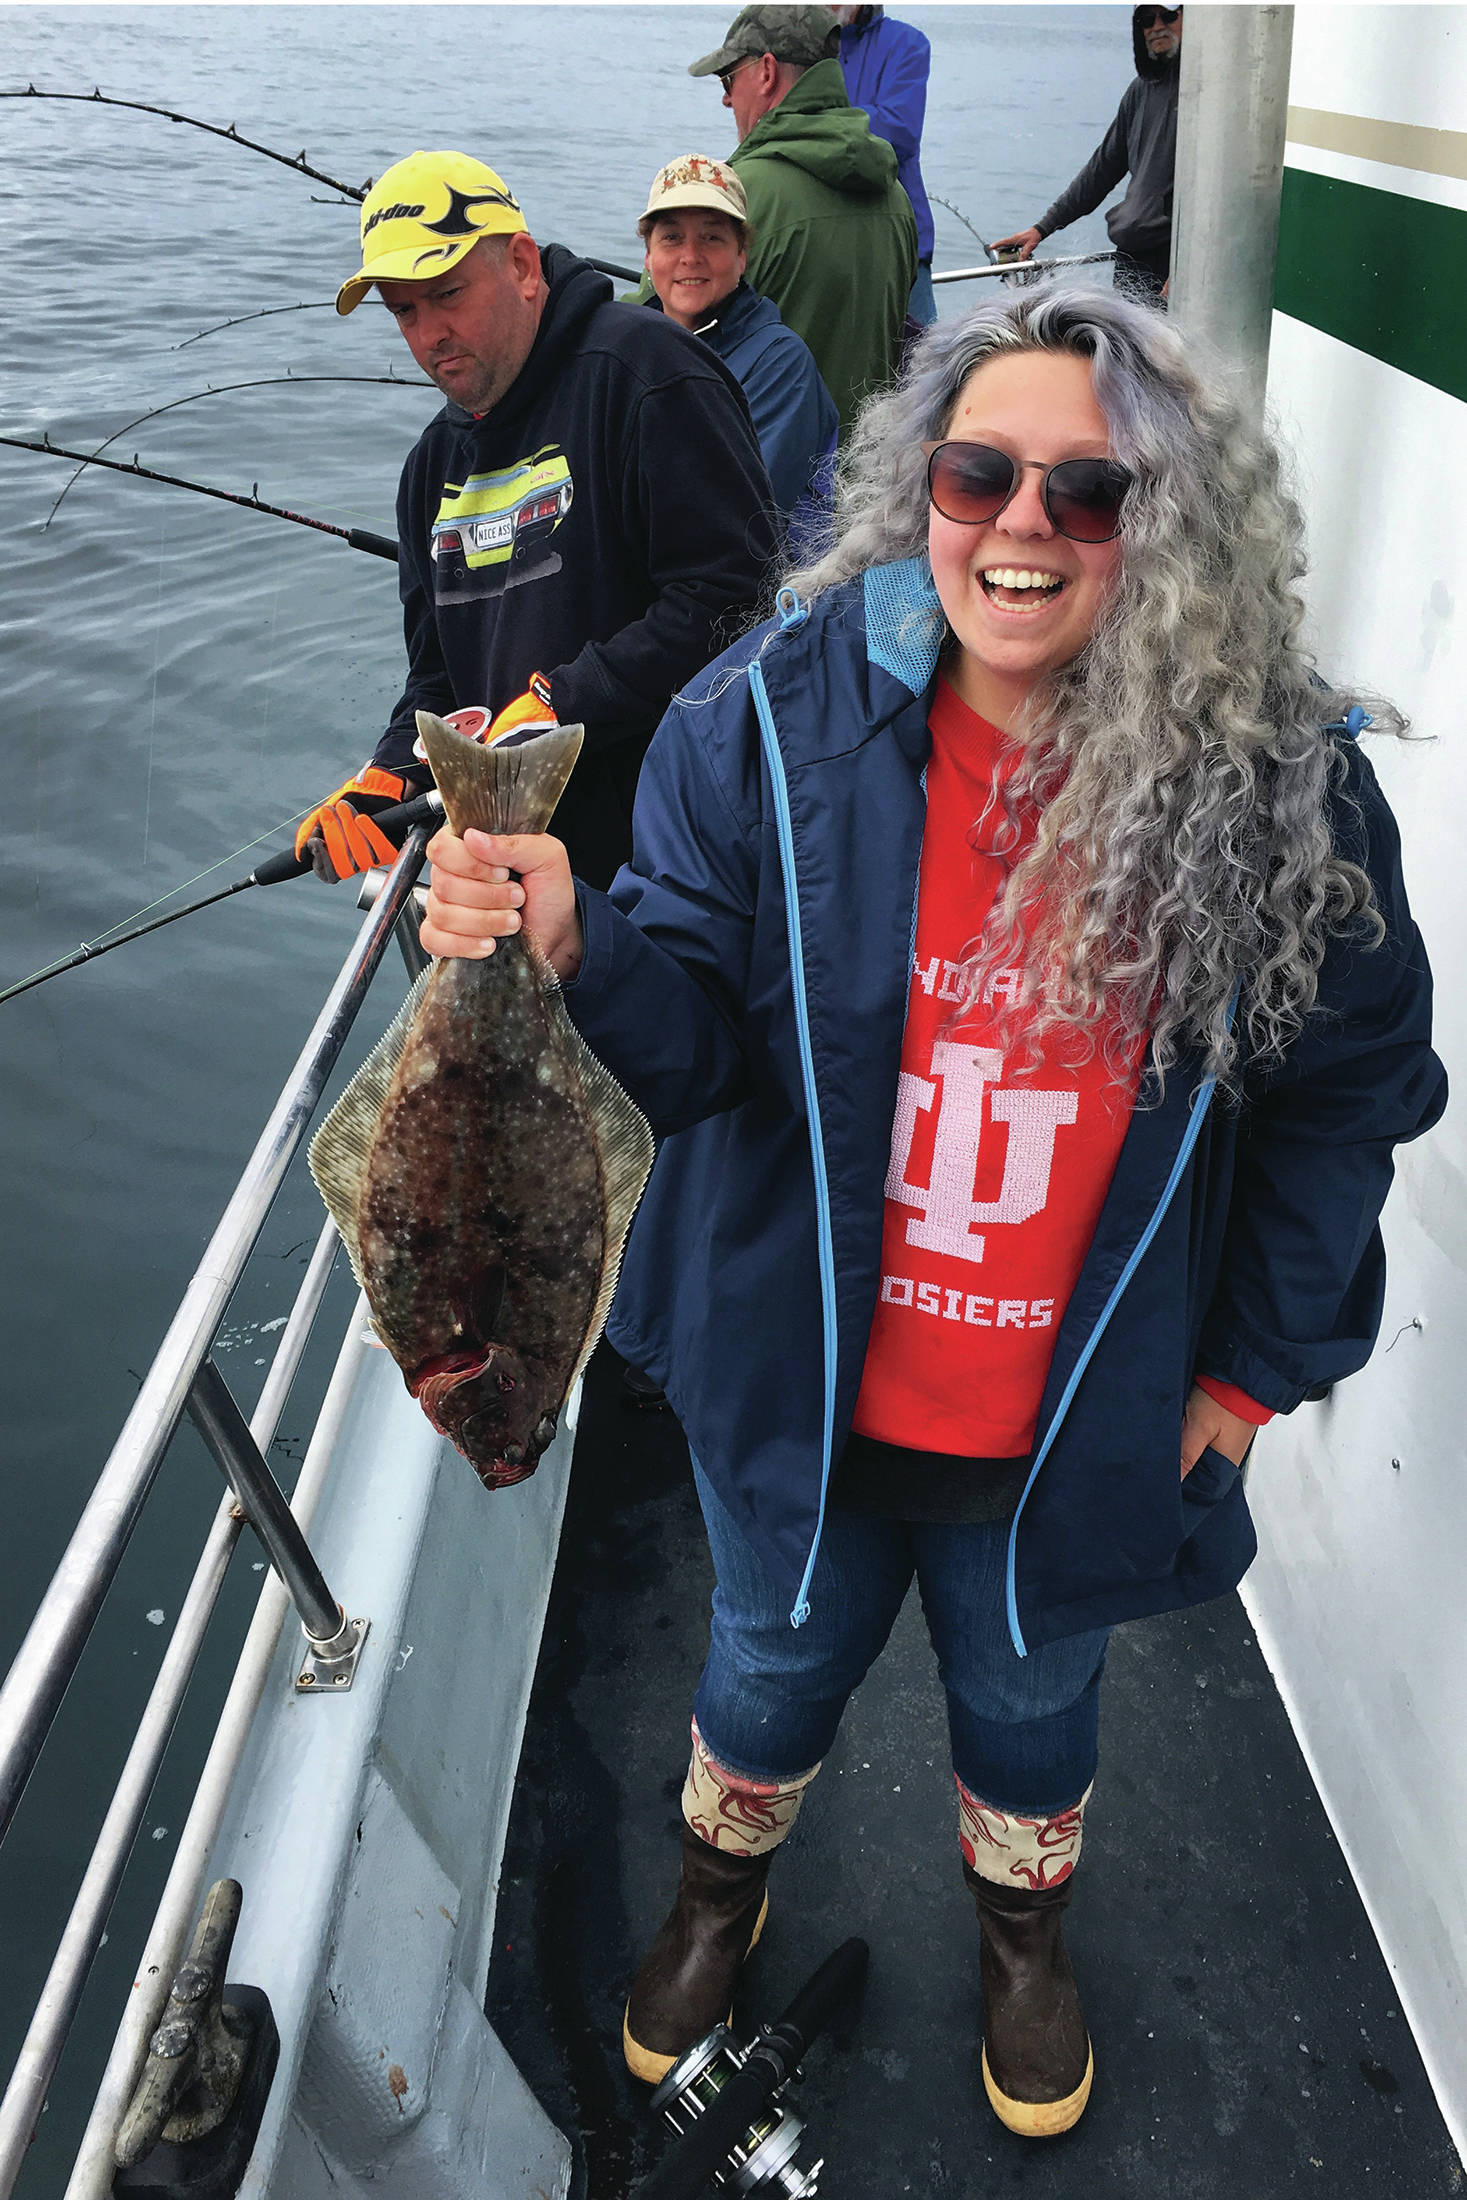 The author laughs at her poor luck at having caught a chicken during a July 2019 charter trip in Kachemak Bay near Homer, Alaska. (Photo courtesy Megan Pacer)